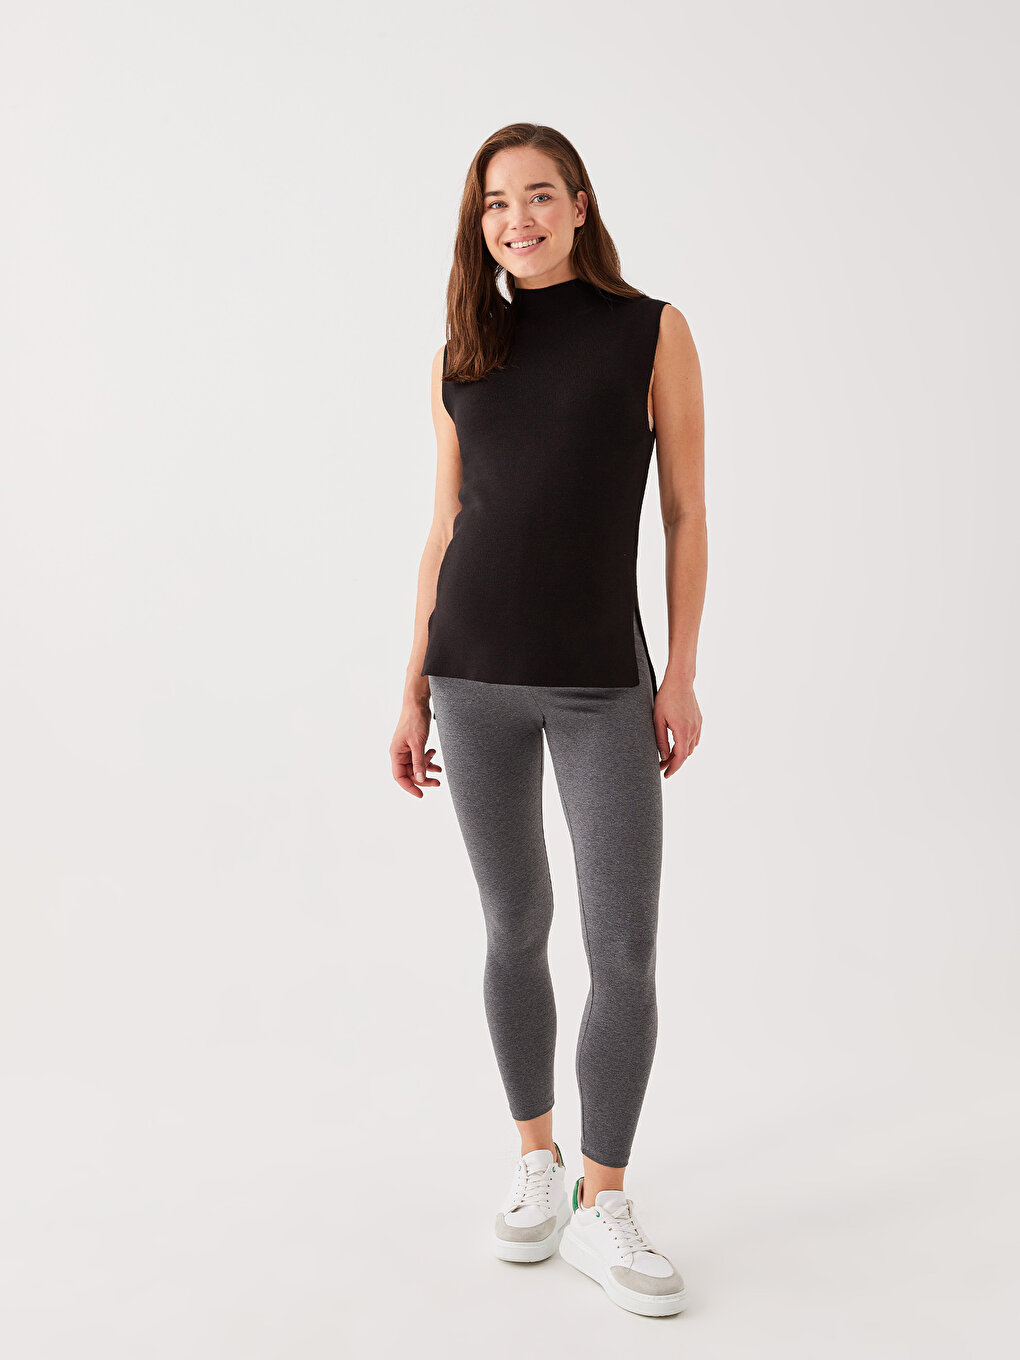 Regular Cotton Maternity Tights with Over-bump Waistband -S30996Z8-L8N -  S30996Z8-L8N - LC Waikiki